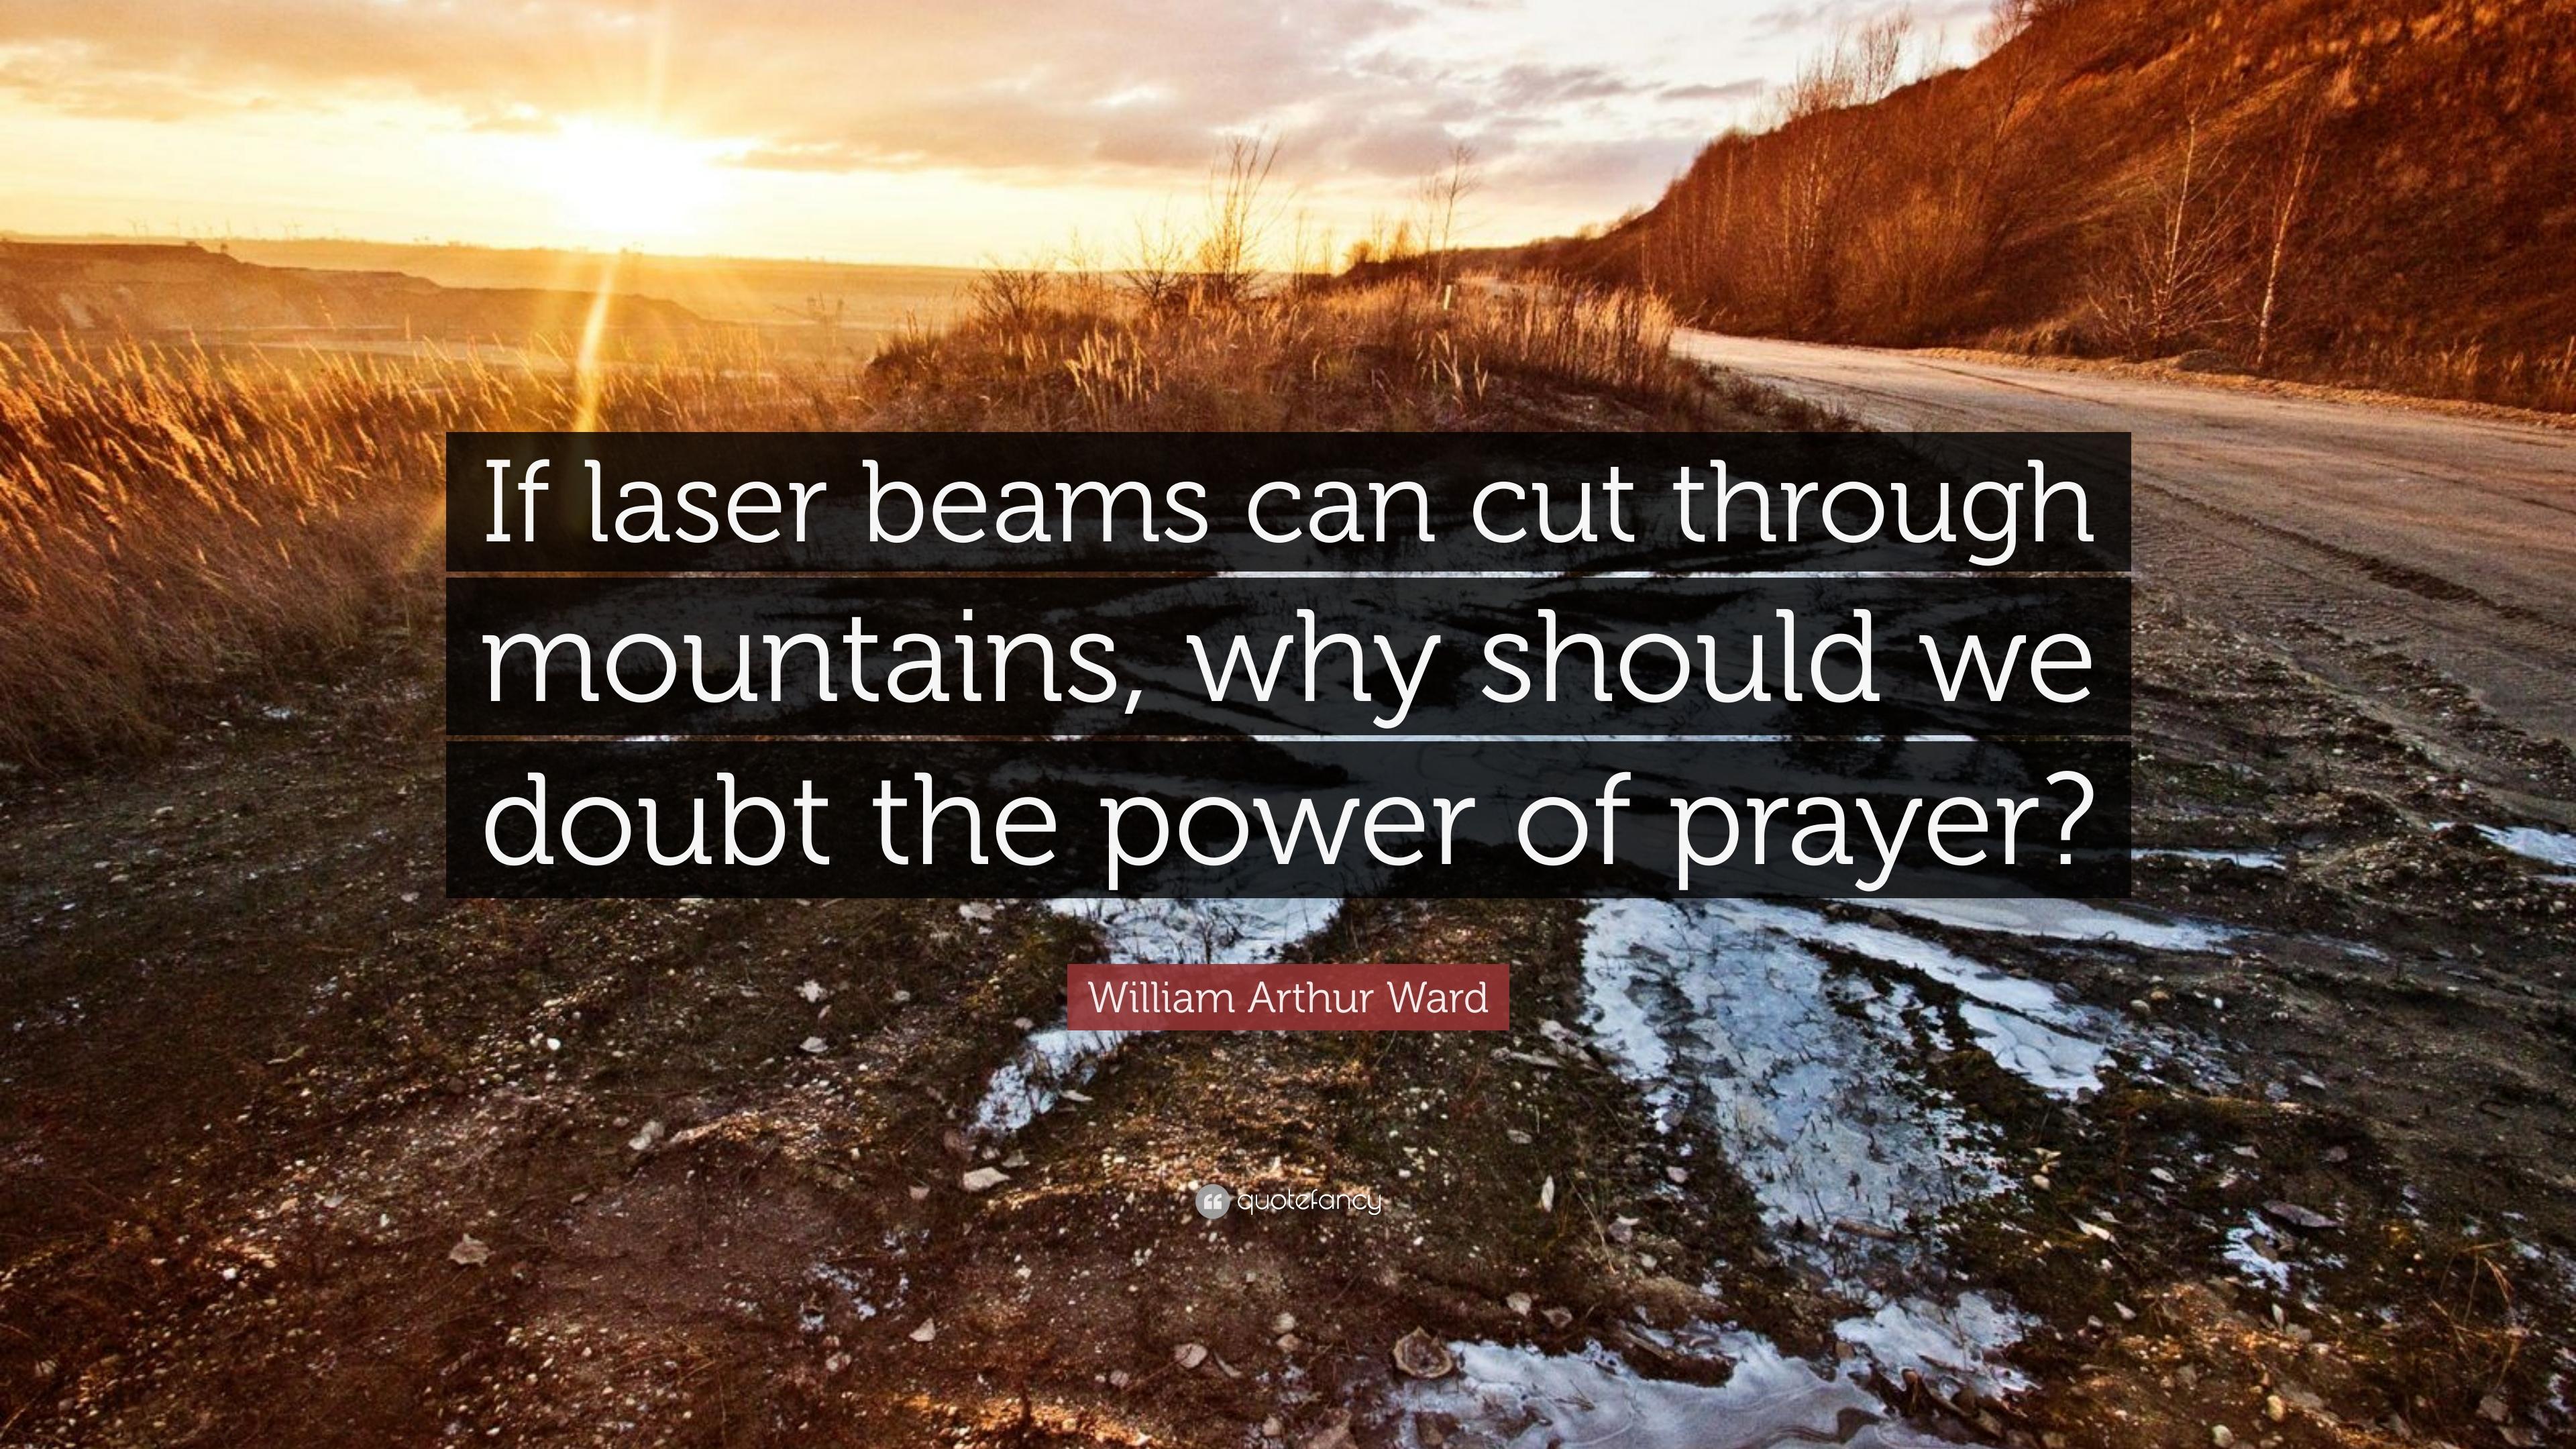 William Arthur Ward Quote: “If laser beams can cut through